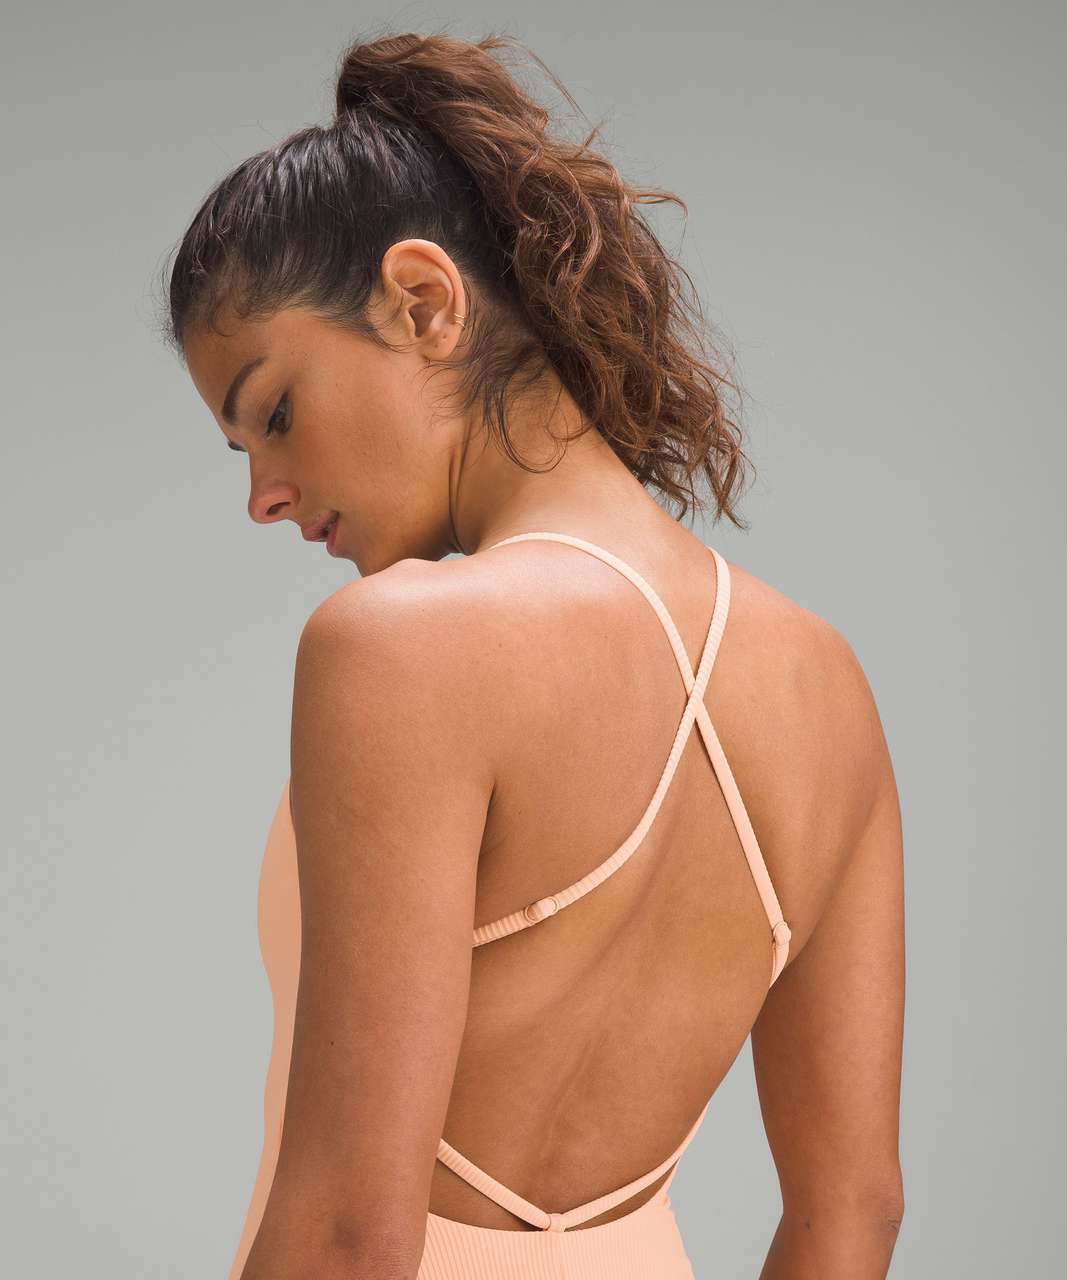 Lululemon Ribbed Cross-Back Skimpy-Fit One-Piece *A/B Cup - Peach Fuzz